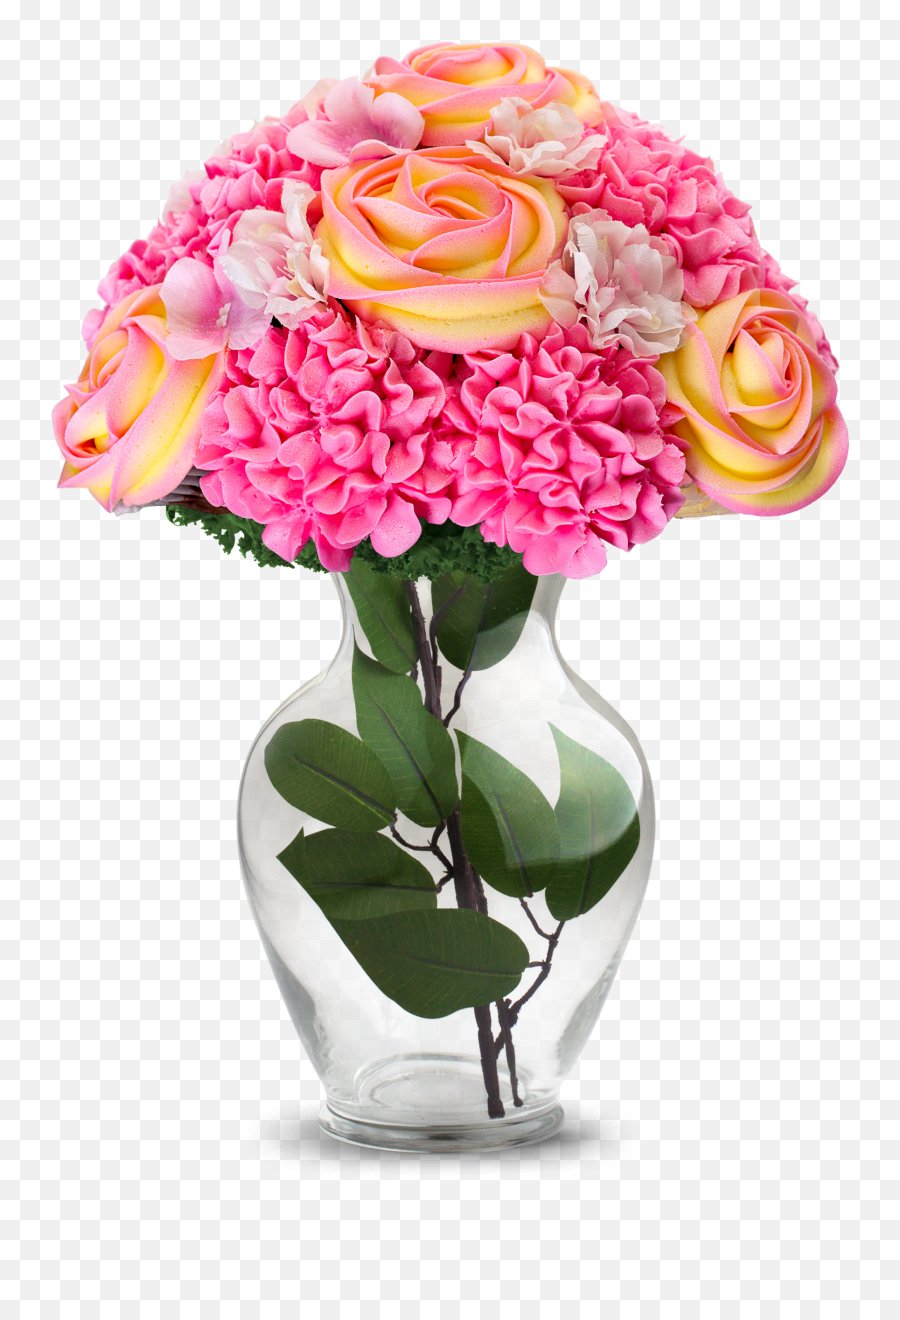 Baked Bouquet - Flower U0026 Cupcake Bouquets For Delivery Evening Gown Baked Bouquet Png,Bouquet Of Roses Png